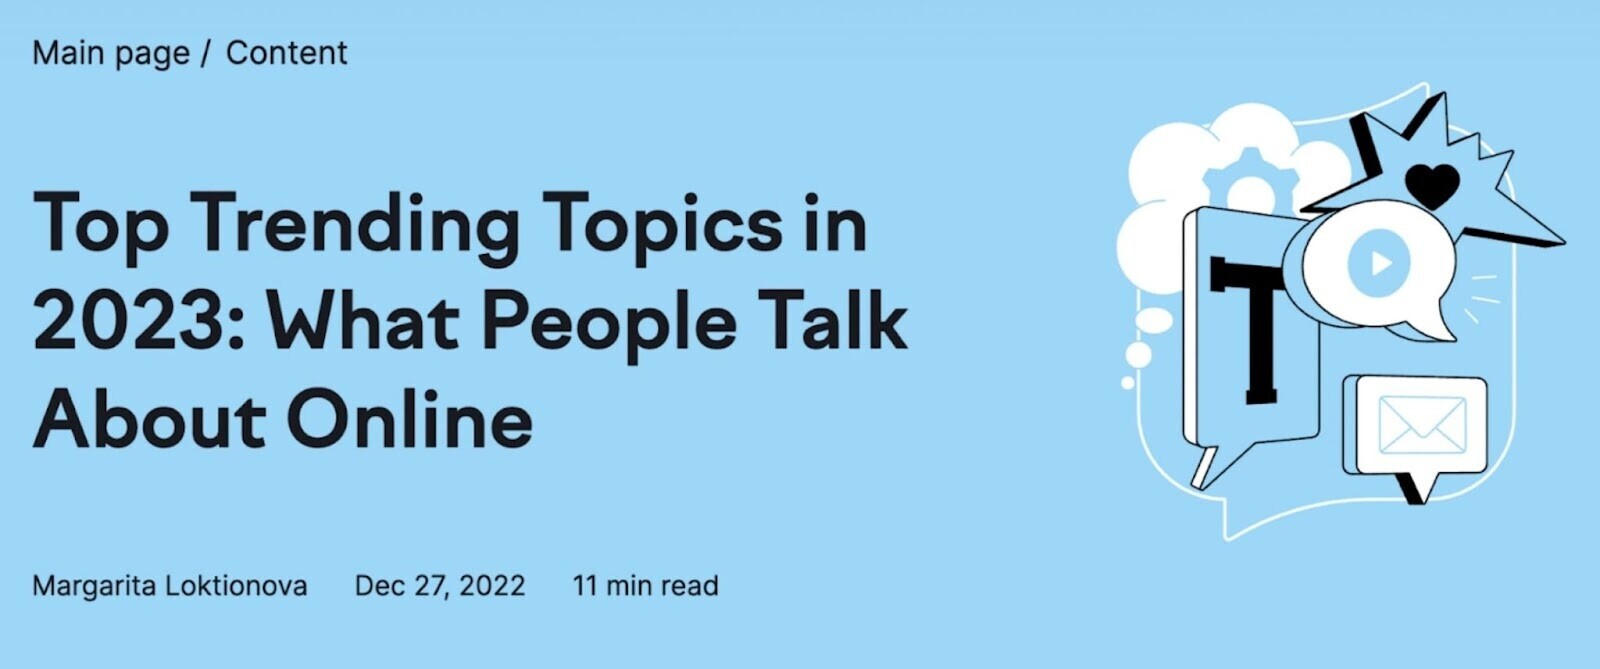 "Top Trending Topics in 2023: What People Talk About Online" blog title